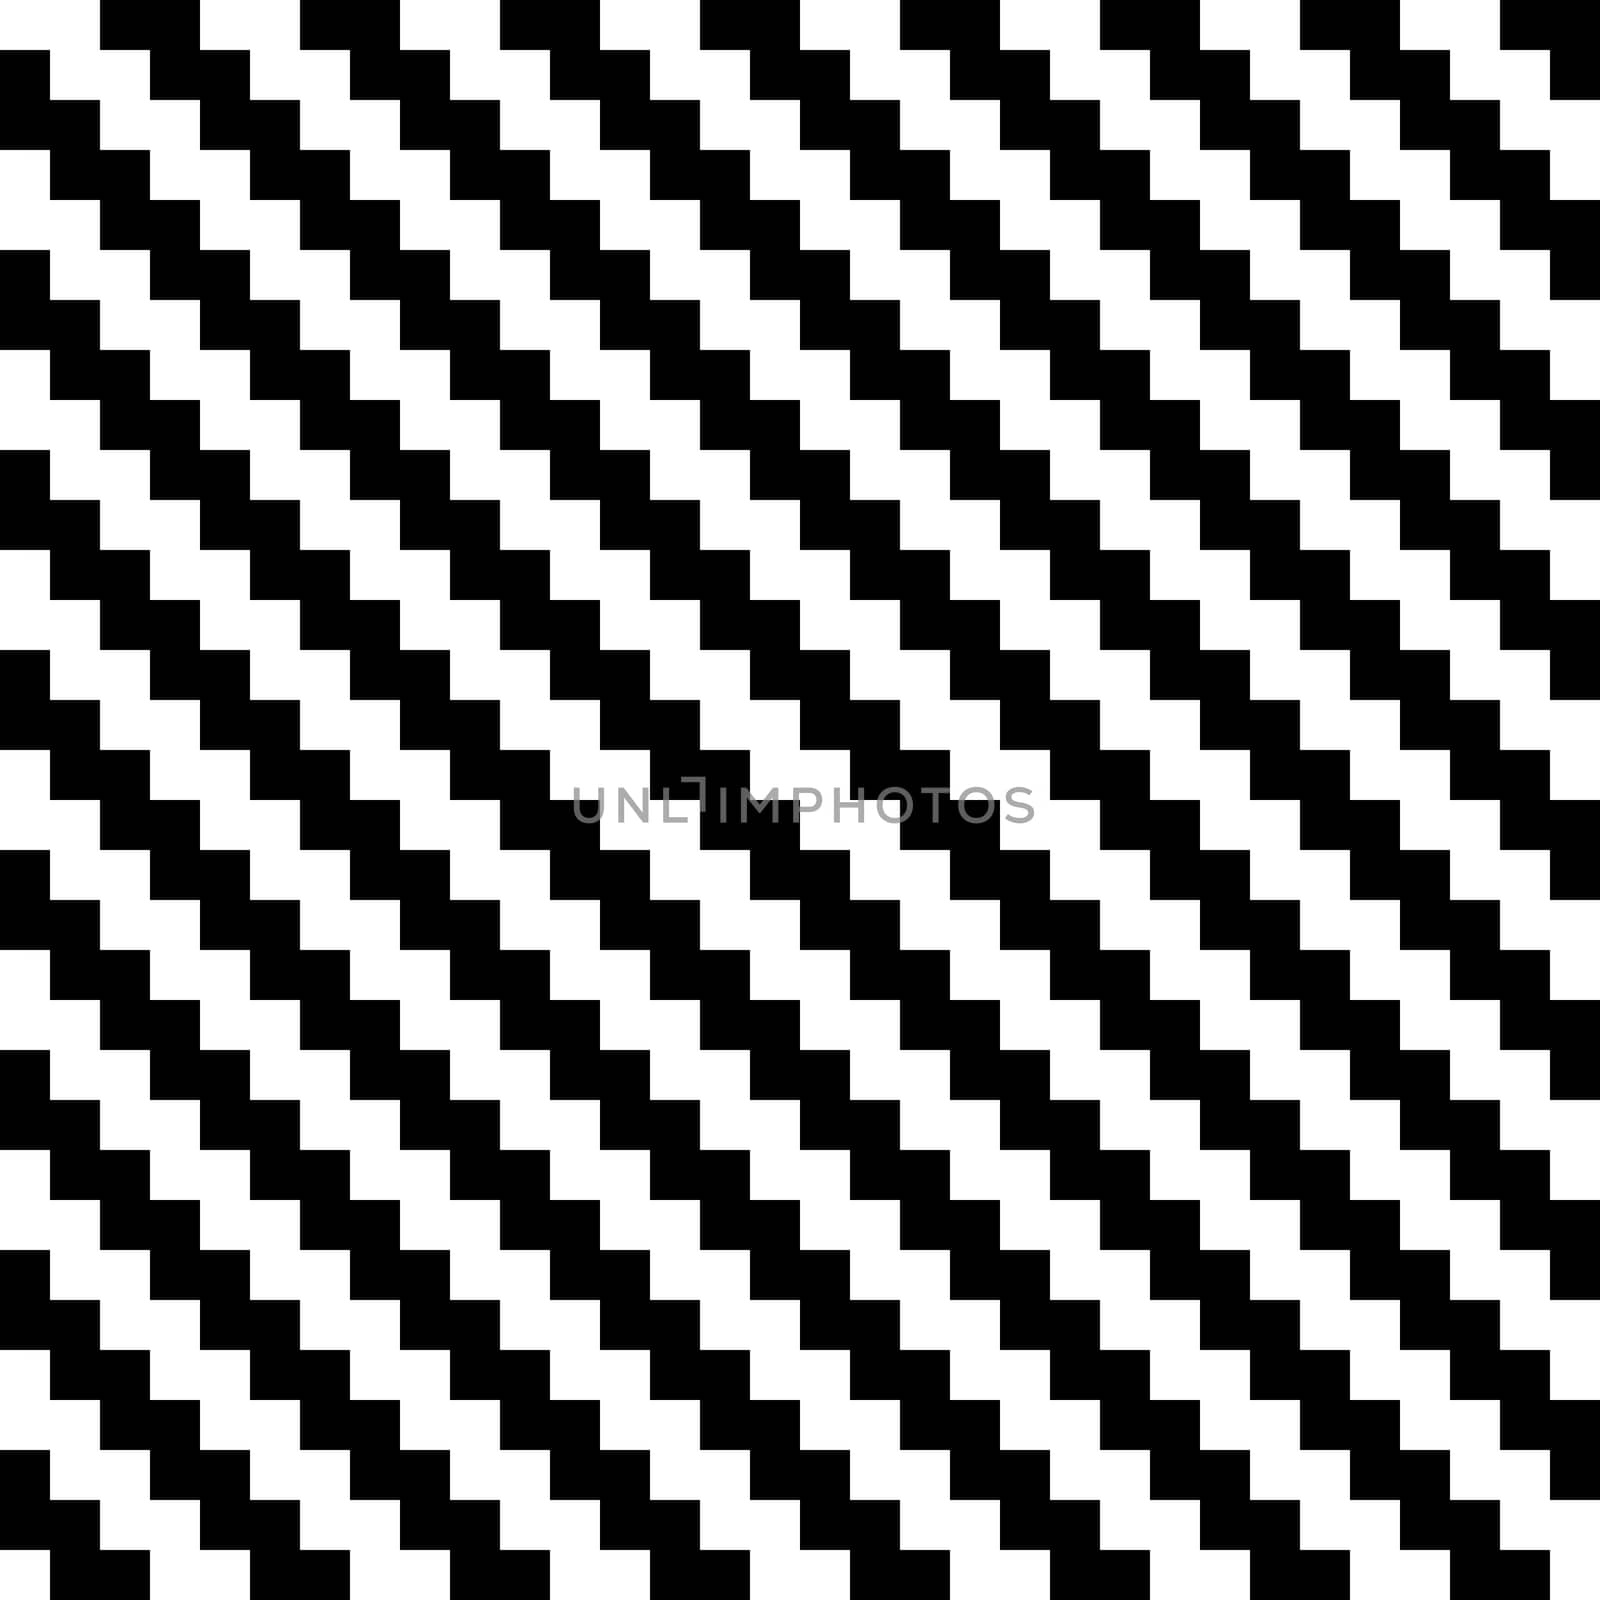 Zigzag lines in black on a white background.Texture or background